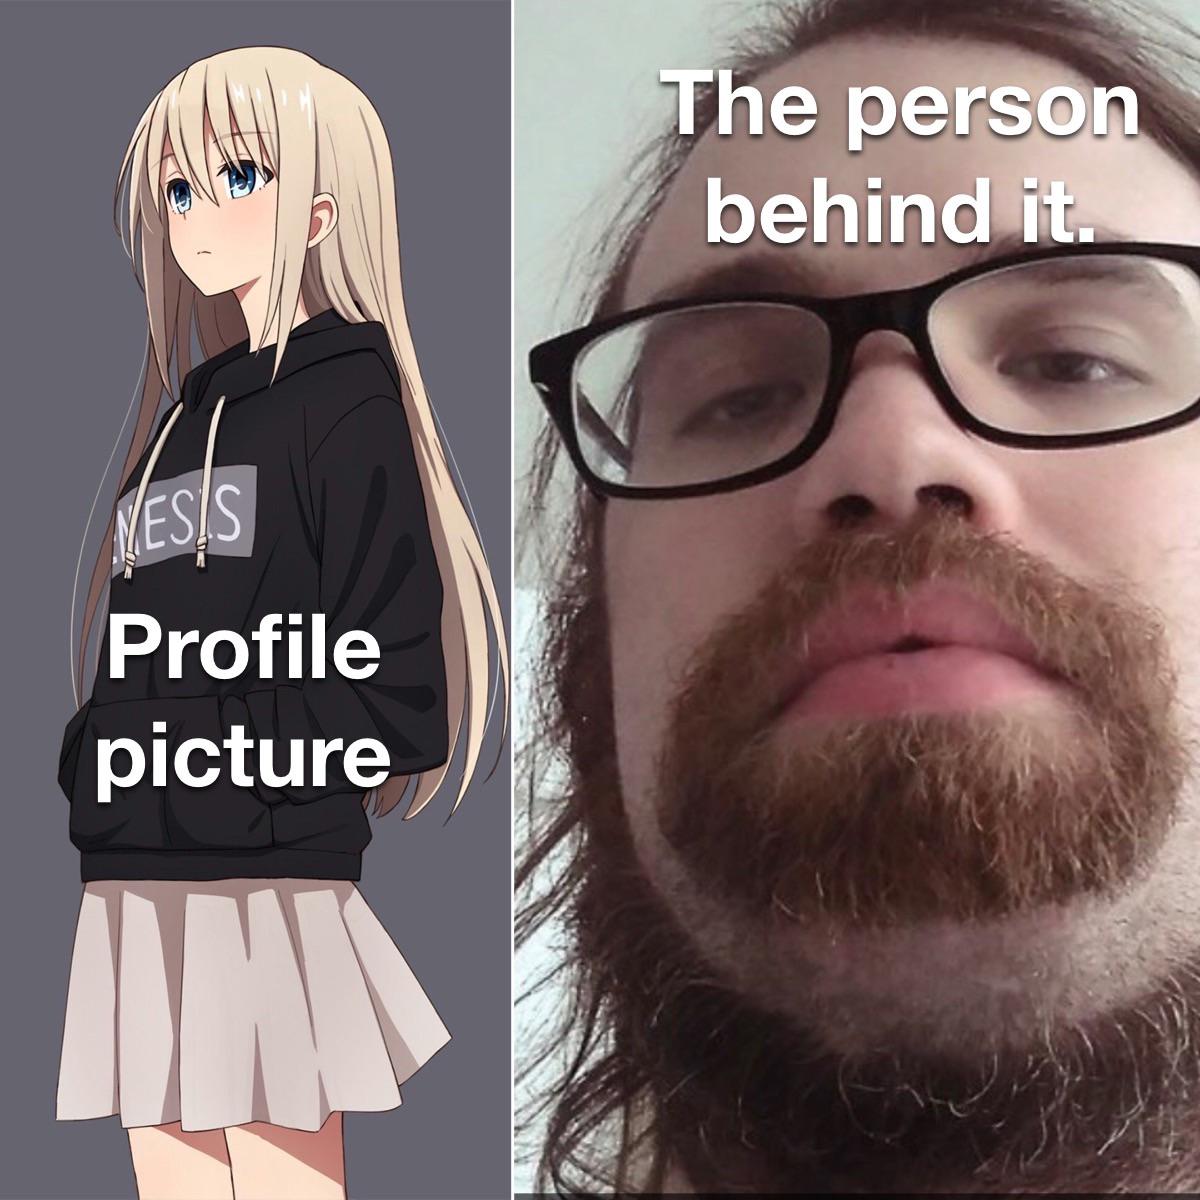 dank memes - anime girl pfp - The person behind it. Wesas Profile picture And